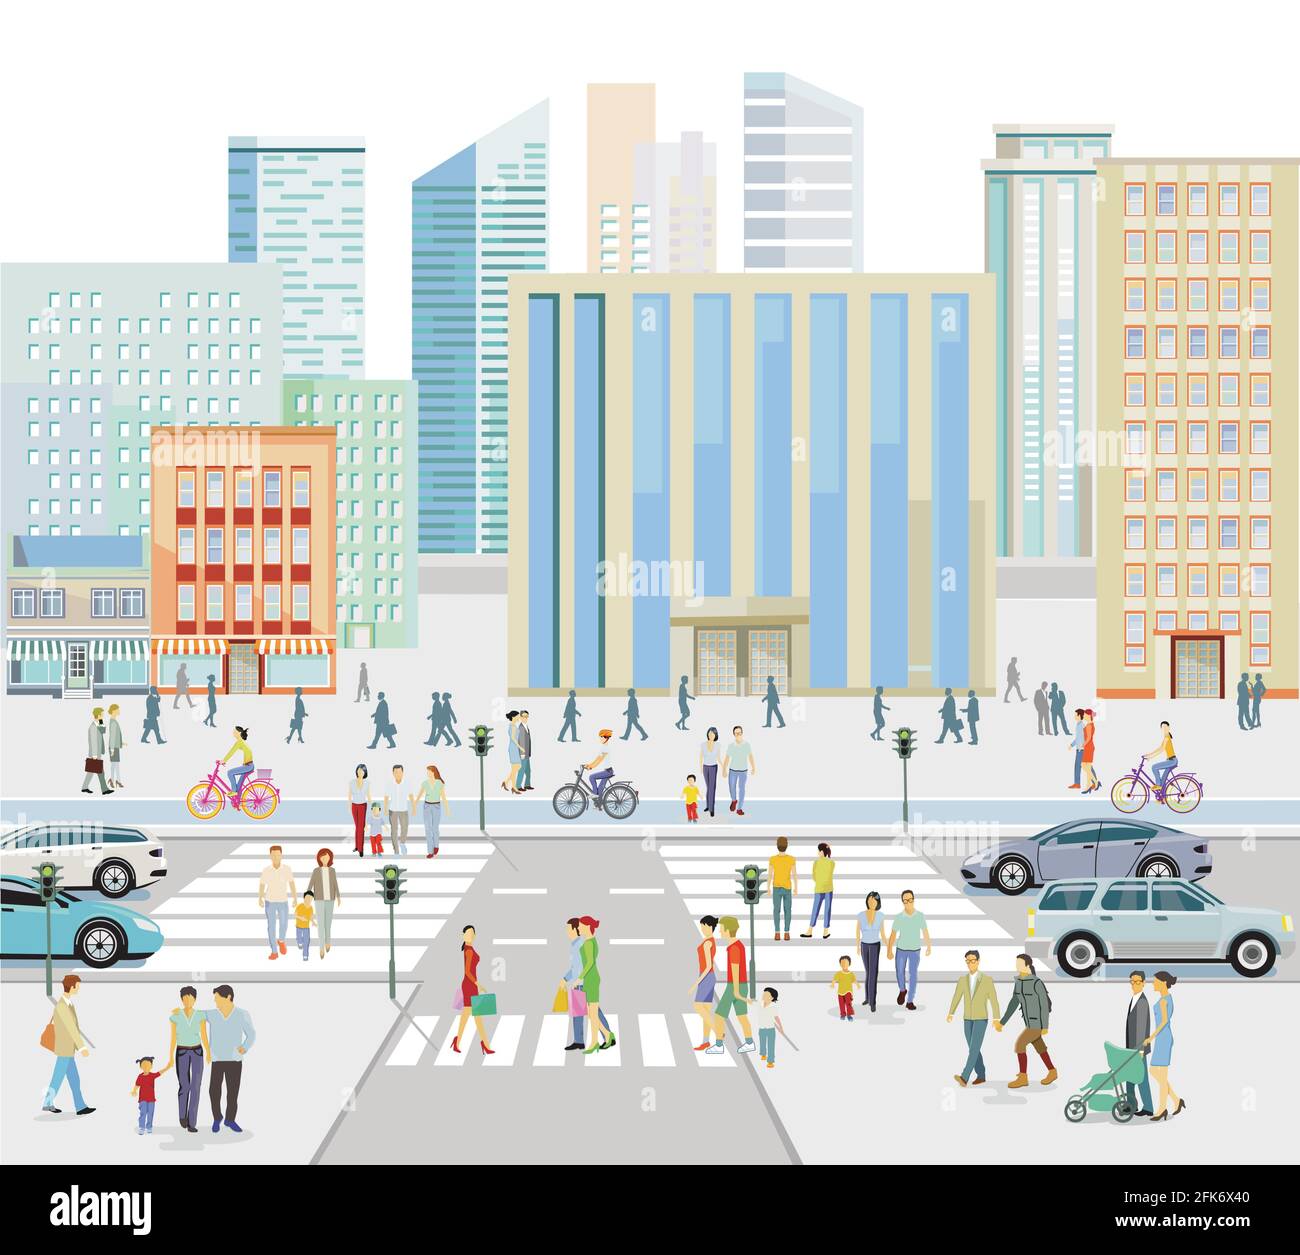 Streets in front of a big city illustration Stock Vector